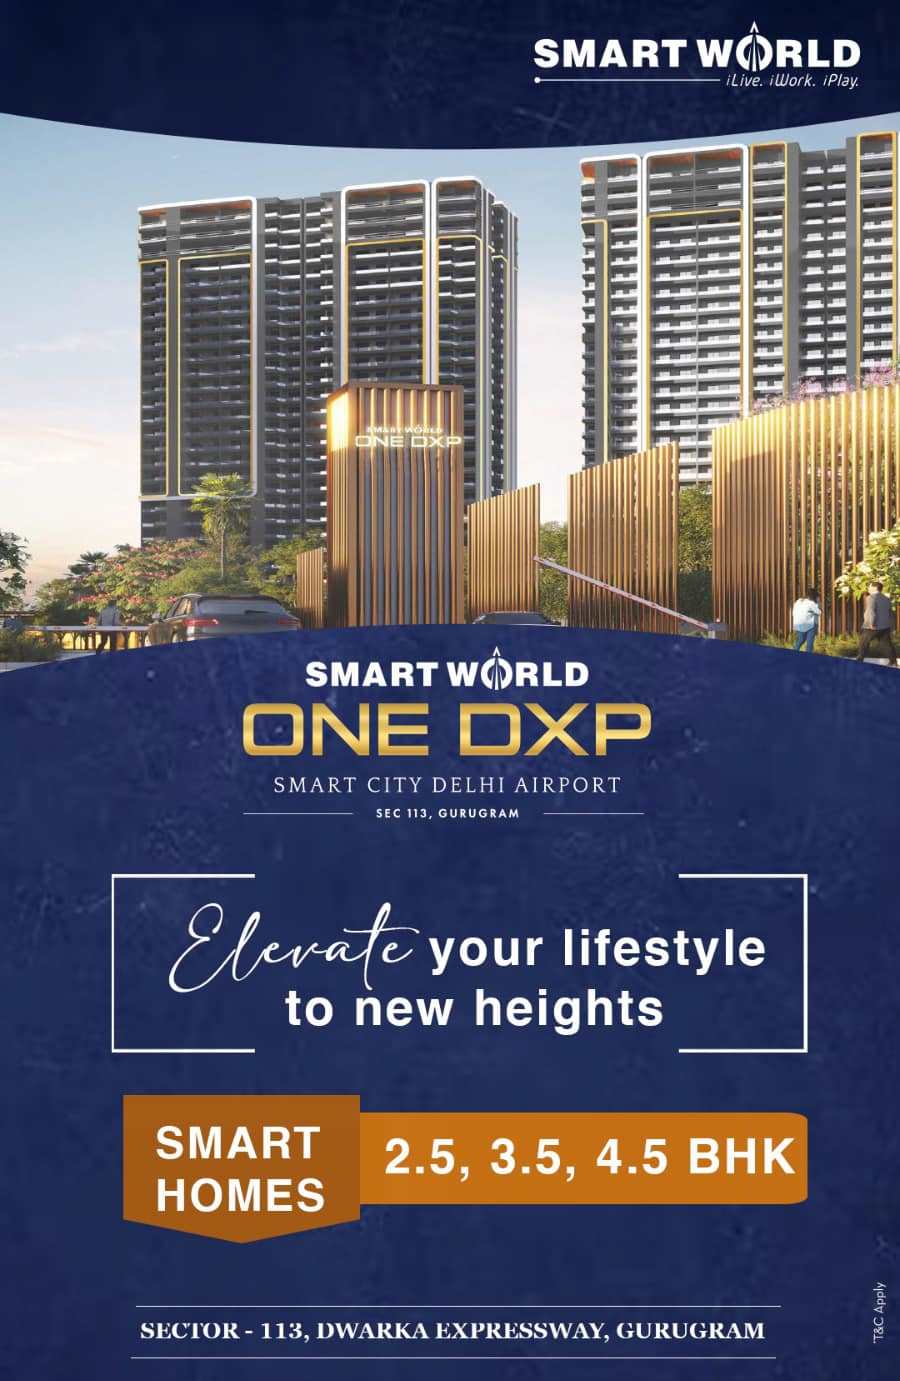 Book 2.5, 3.5 and 4.5 BHK Smart home Rs 1.83 Cr at Smart World One DXP in Sector 113, Gurgaon